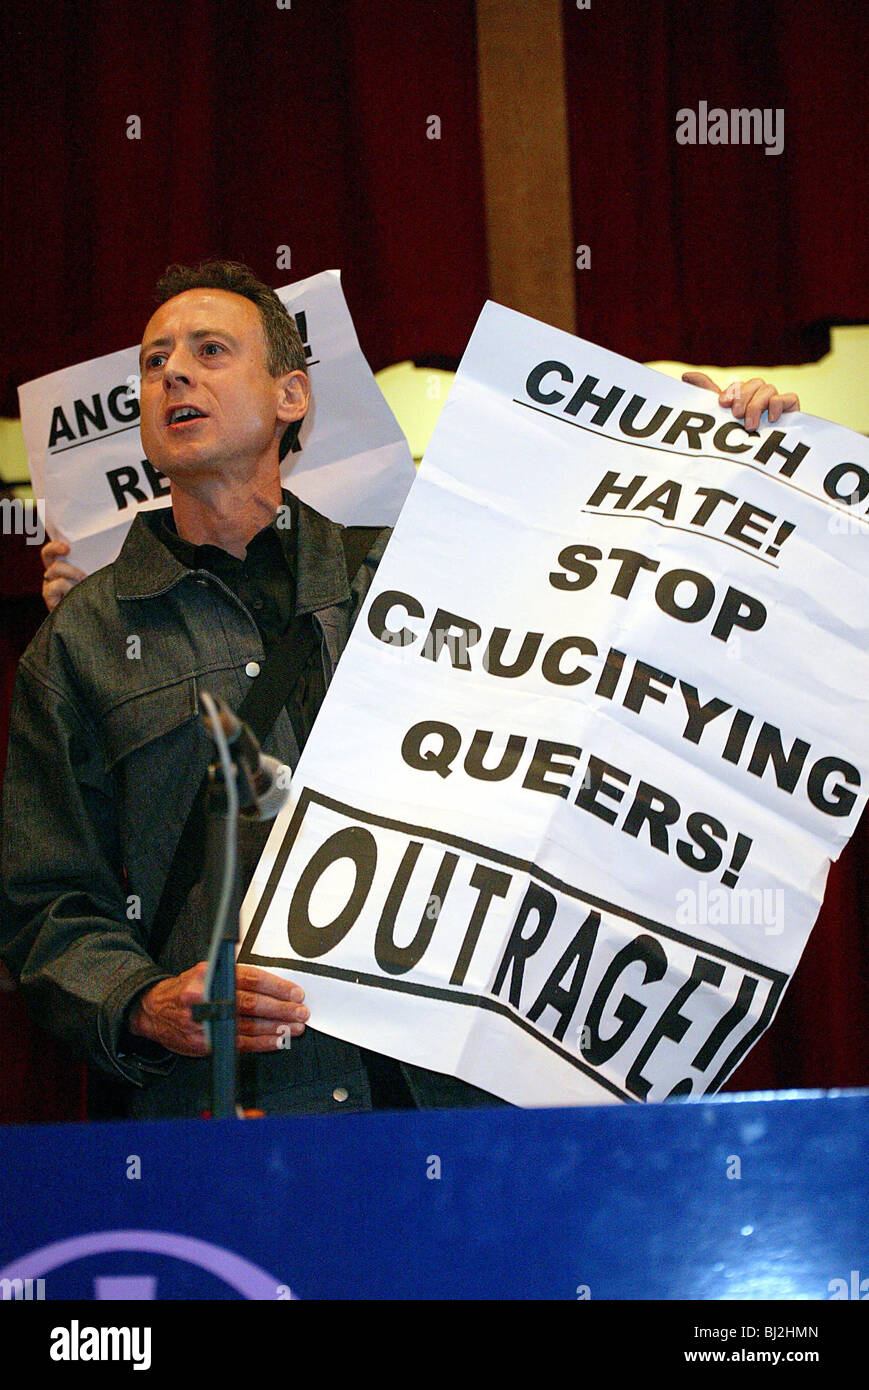 PETER TATCHELL GAY HUMAN RIGHTS CAMPAIGNER 13 July 2003 YORK ENGLAND Stock Photo